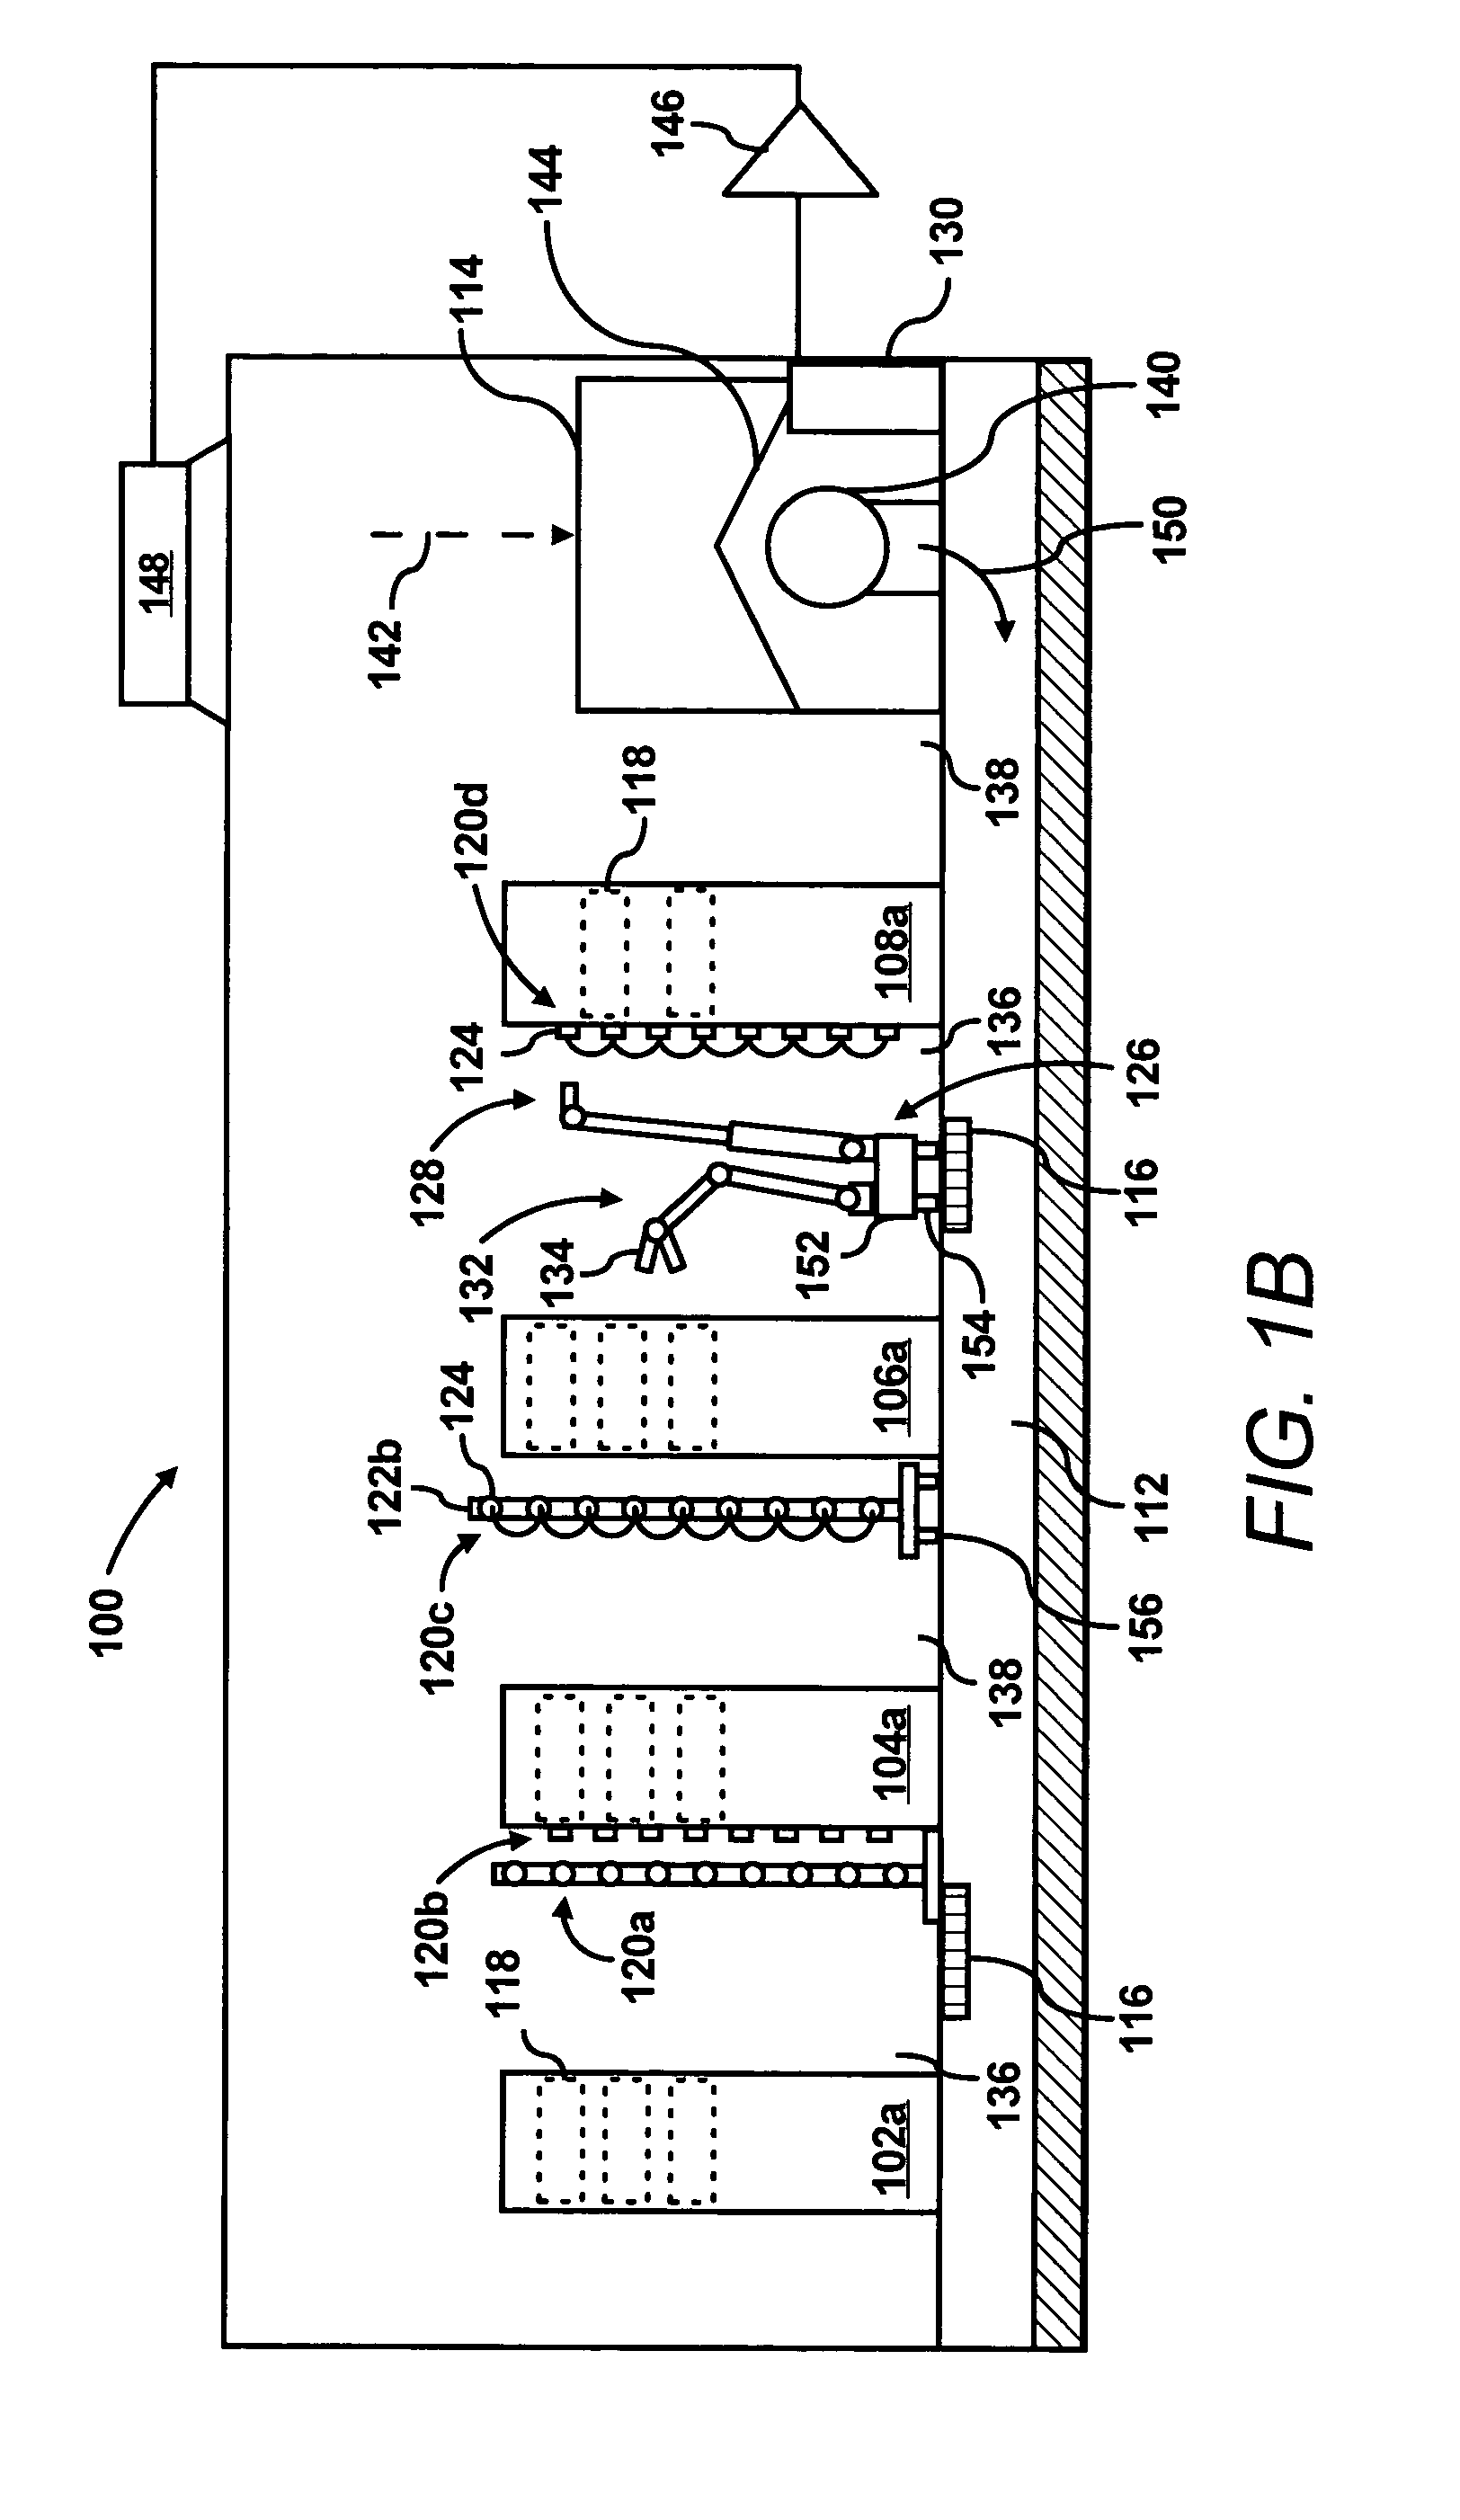 Data collection system having a data collector